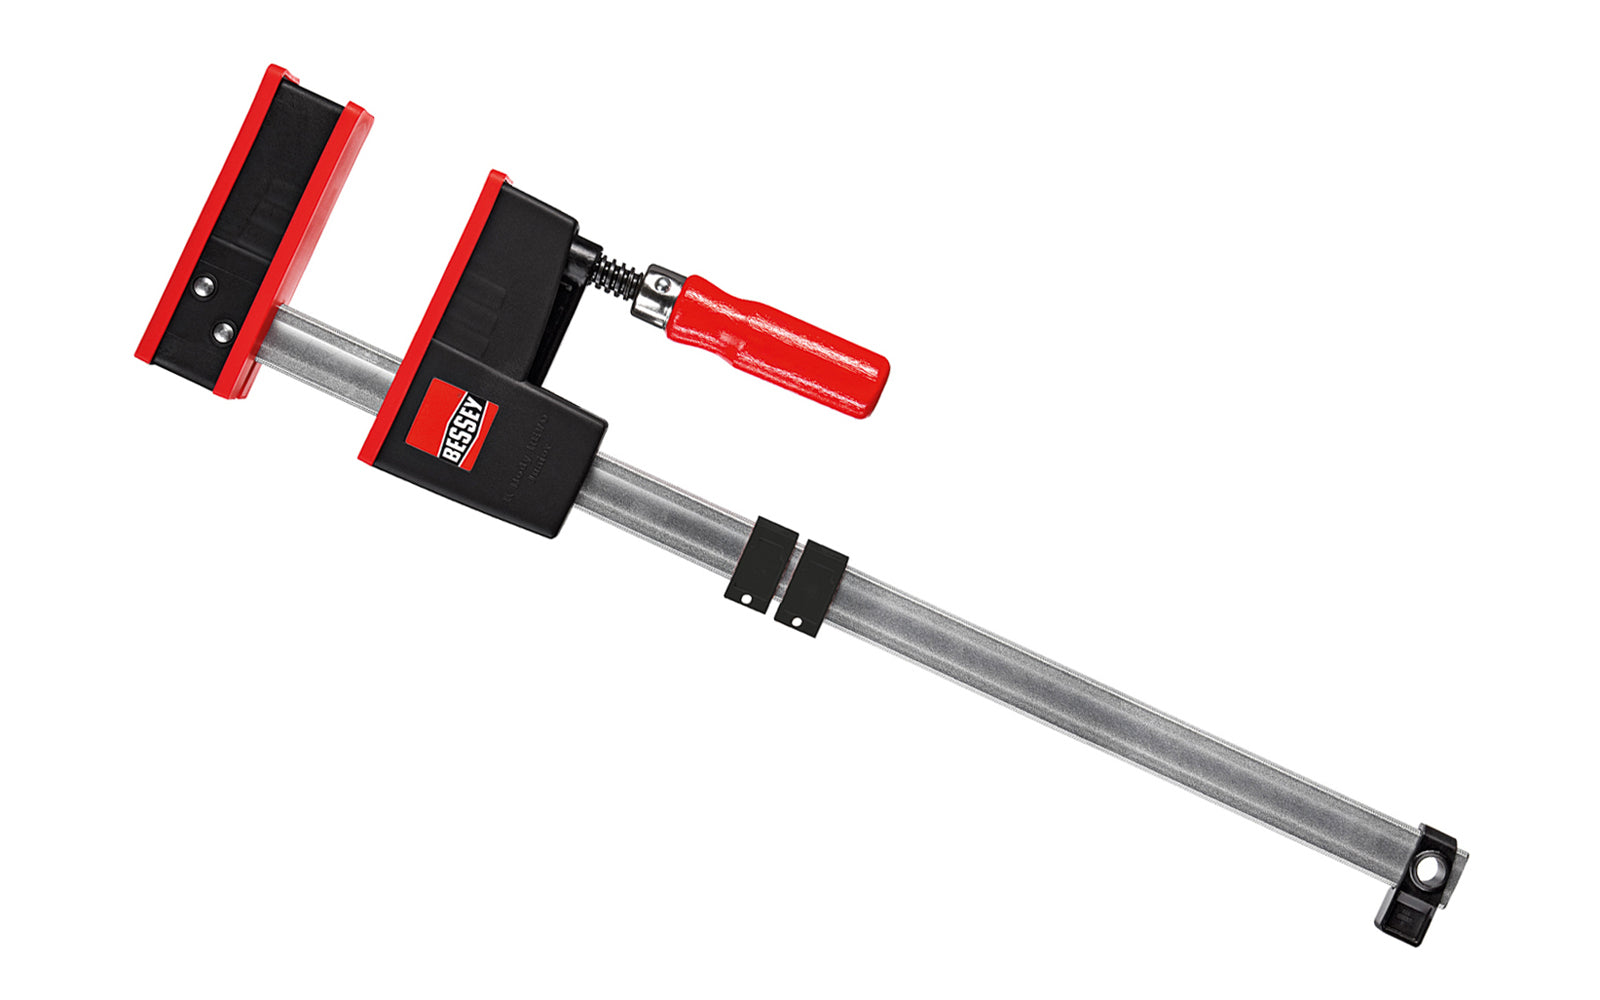 Bessey Parallel K-Body REVO JR Bar Clamps have 90 degree jaws that make cabinet work, frame ups, drawers & any other right-angle glue-up a much easier task. 18" max opening - 3-1/4" throat depth - Model KRJR-18 - Bessey K Body REVO JR - The large surface areas distribute high clamping force evenly - Wooden Handles - 091162001417